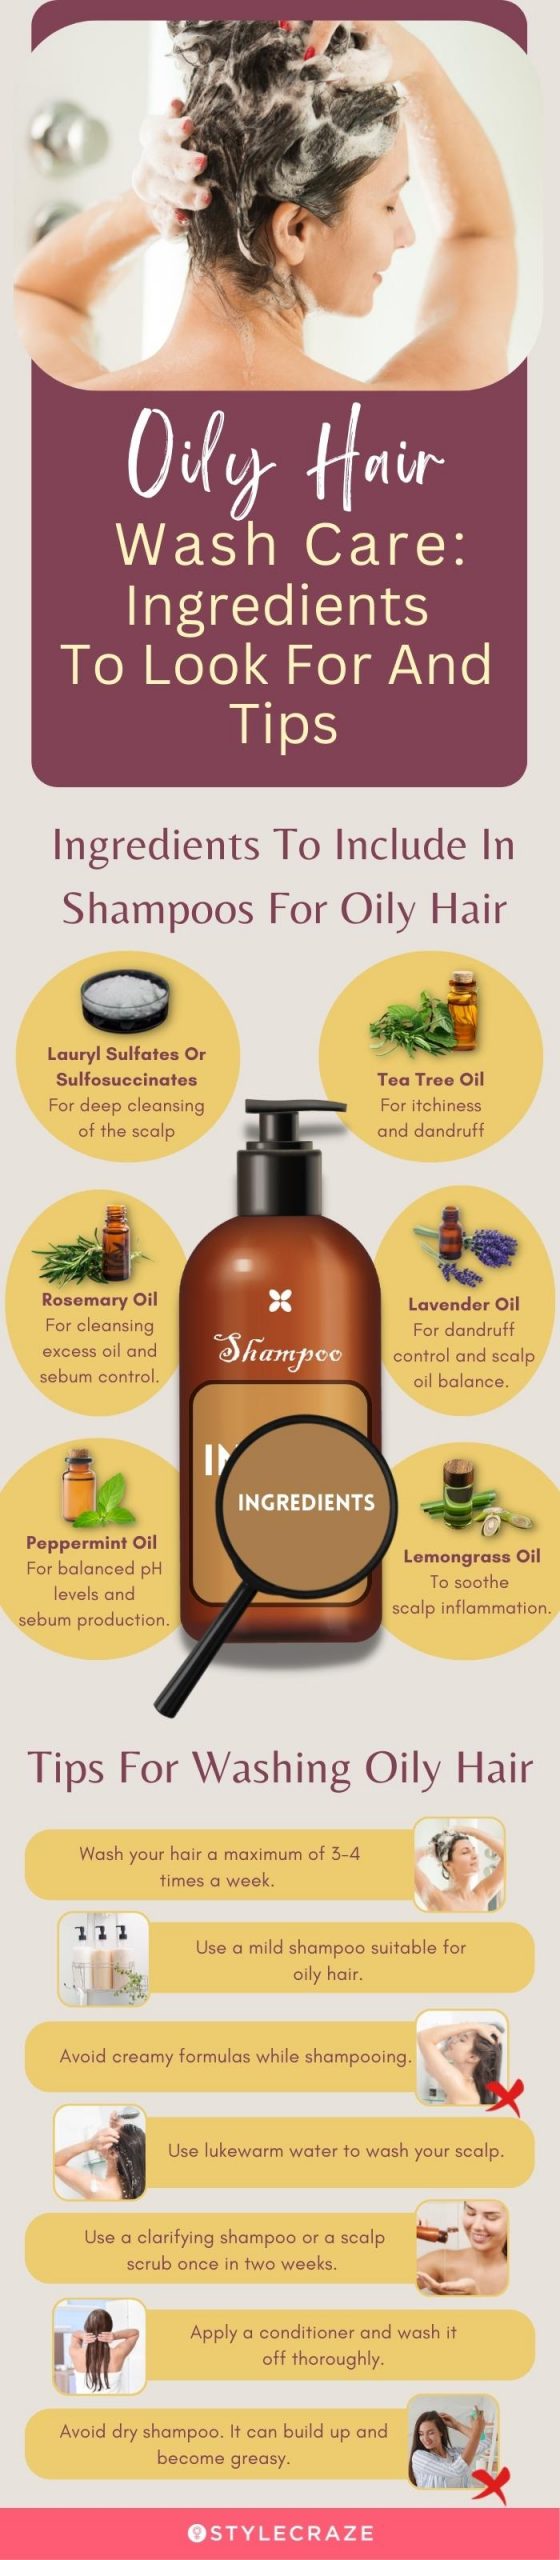 Oily Hair Wash Care: Ingredients To Look For And Tips (infographic)